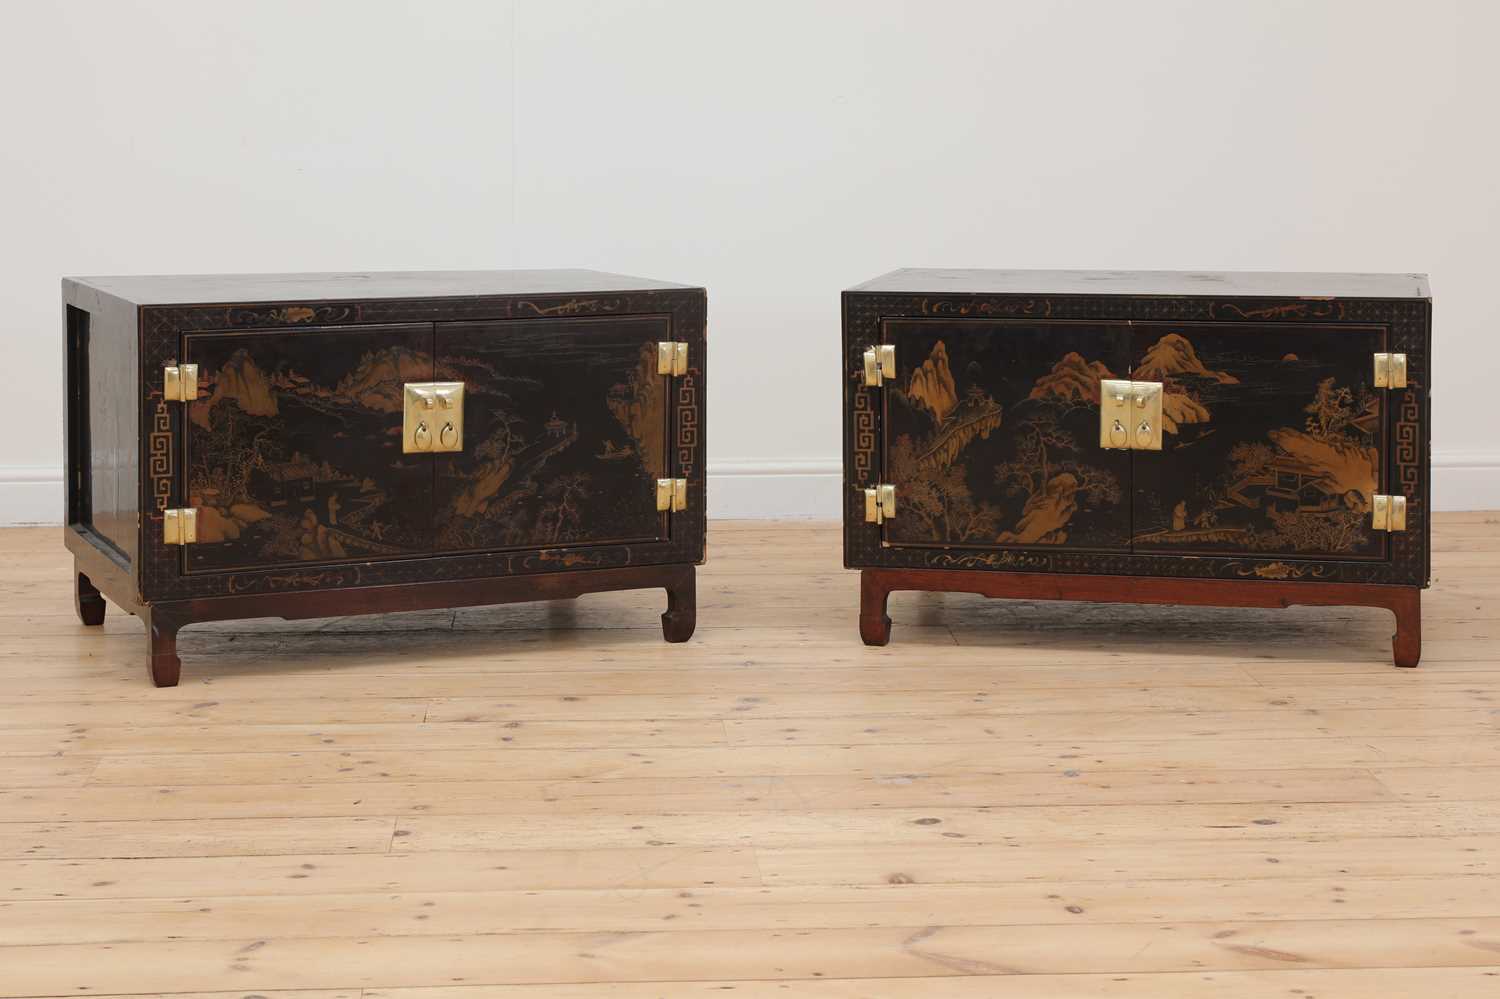 Lot 124 - A pair of lacquered low table cabinets